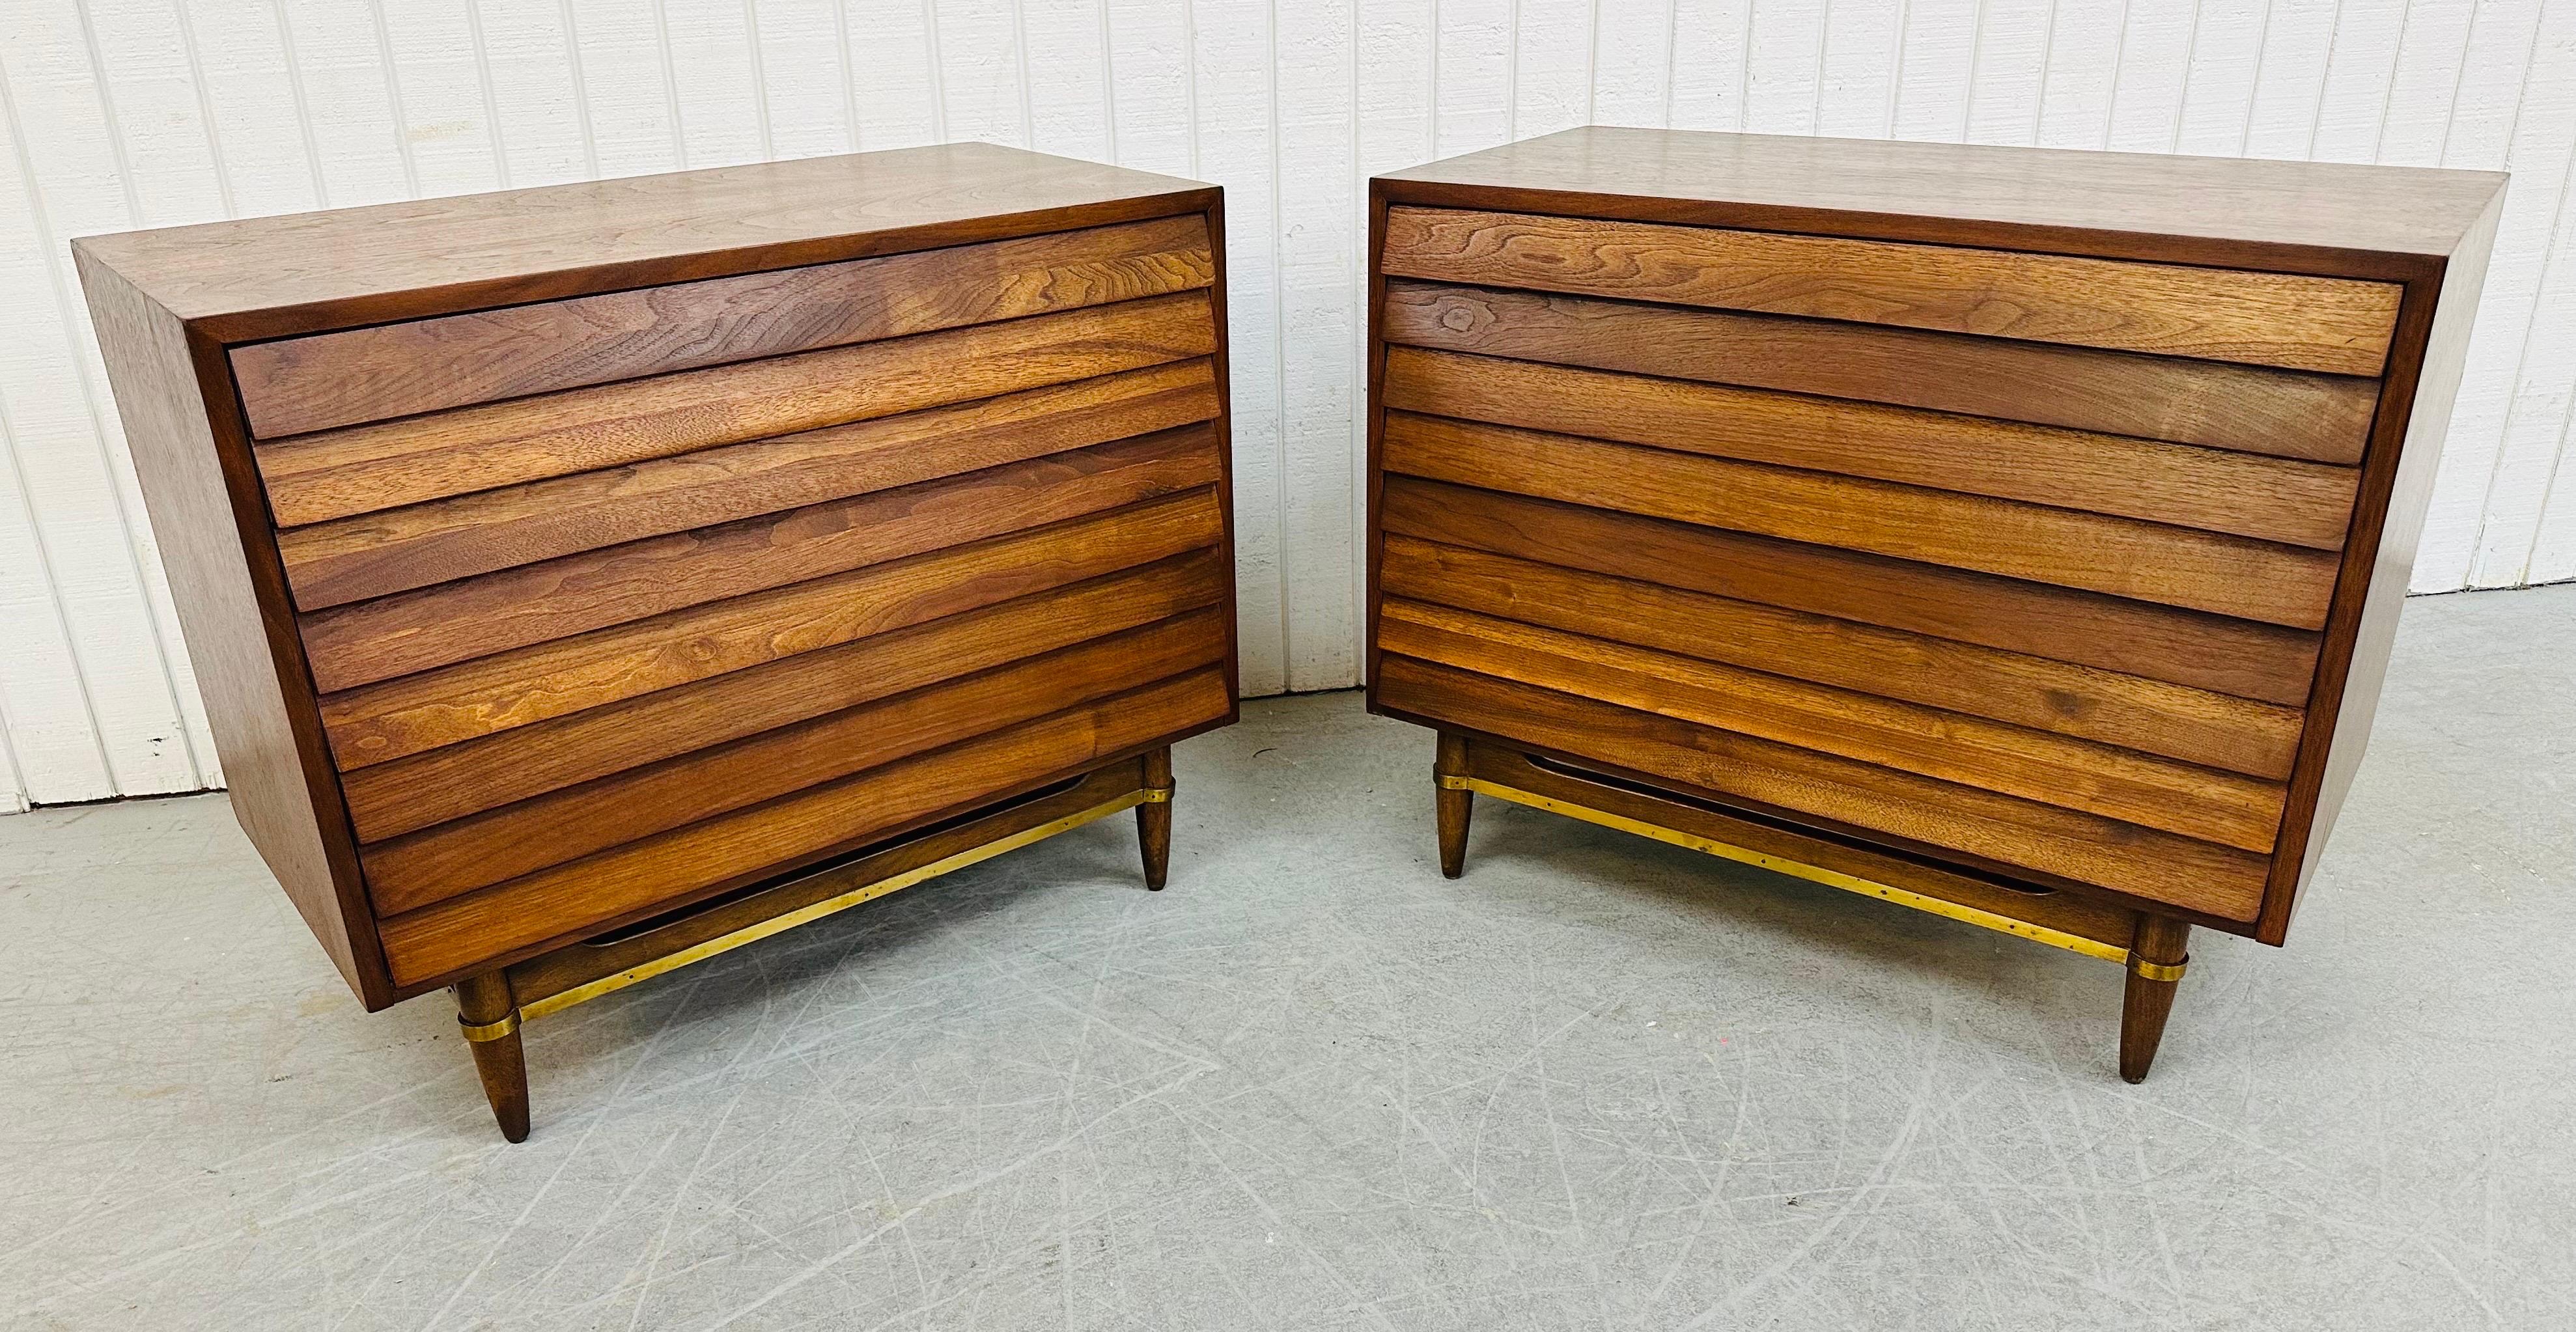 This listing is for a pair of Mid-Century Modern American of Martinsville Dania Walnut Bachelor Chests. Featuring a straight line design with louvered front drawers, three drawers for storage, modern legs with a brass stretcher, and a beautiful